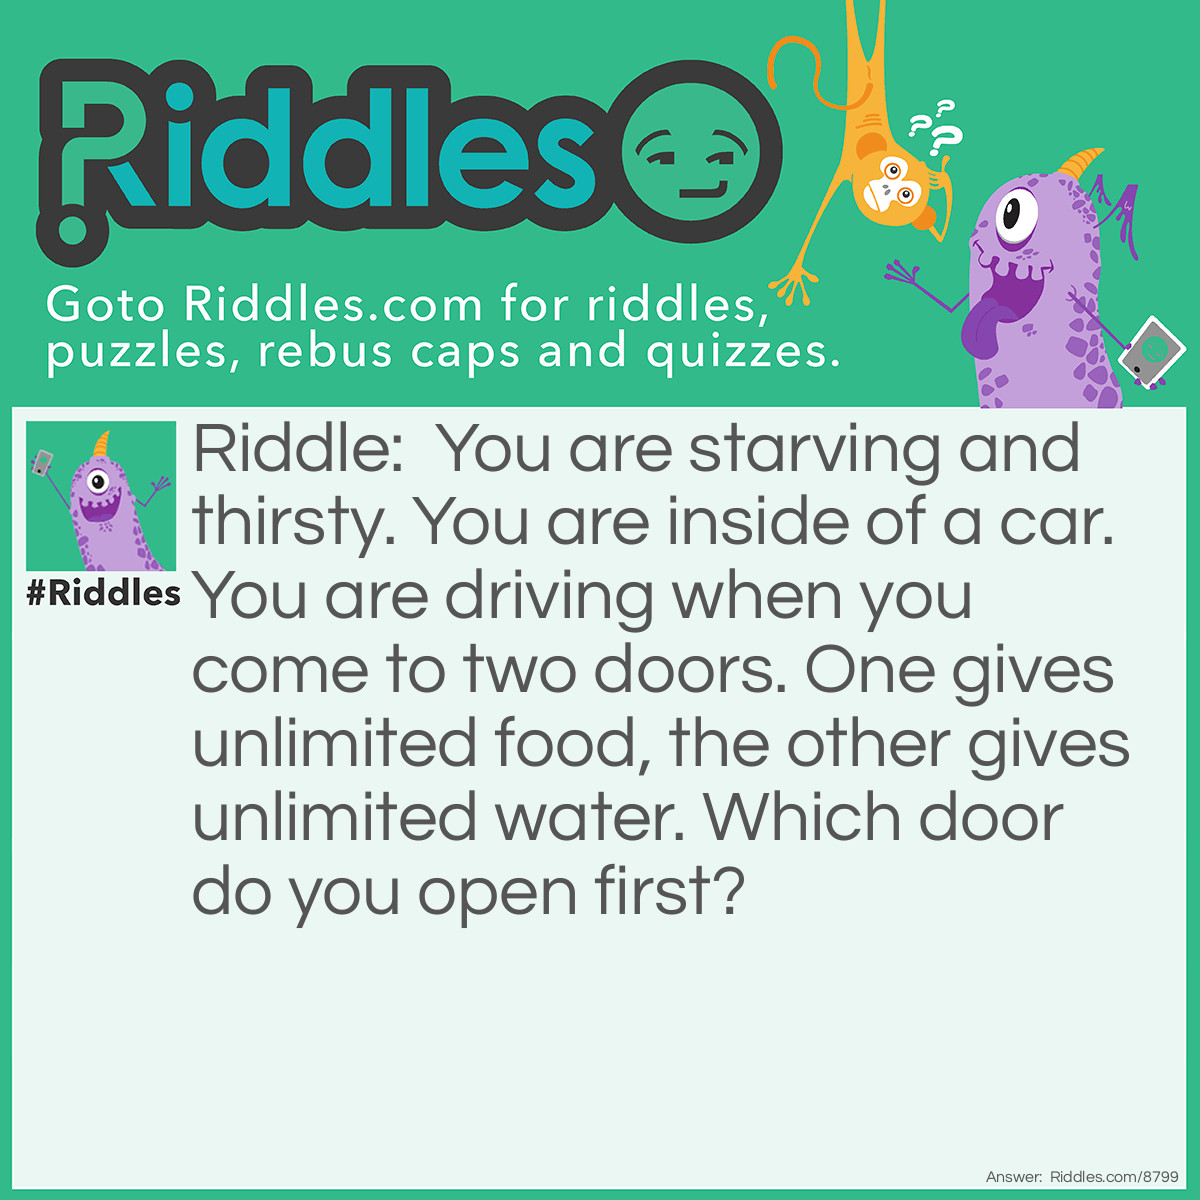 Riddle: You are starving and thirsty. You are inside of a car. You are driving when you come to two doors. One gives unlimited food, the other gives unlimited water. Which door do you open first? Answer: The car door.